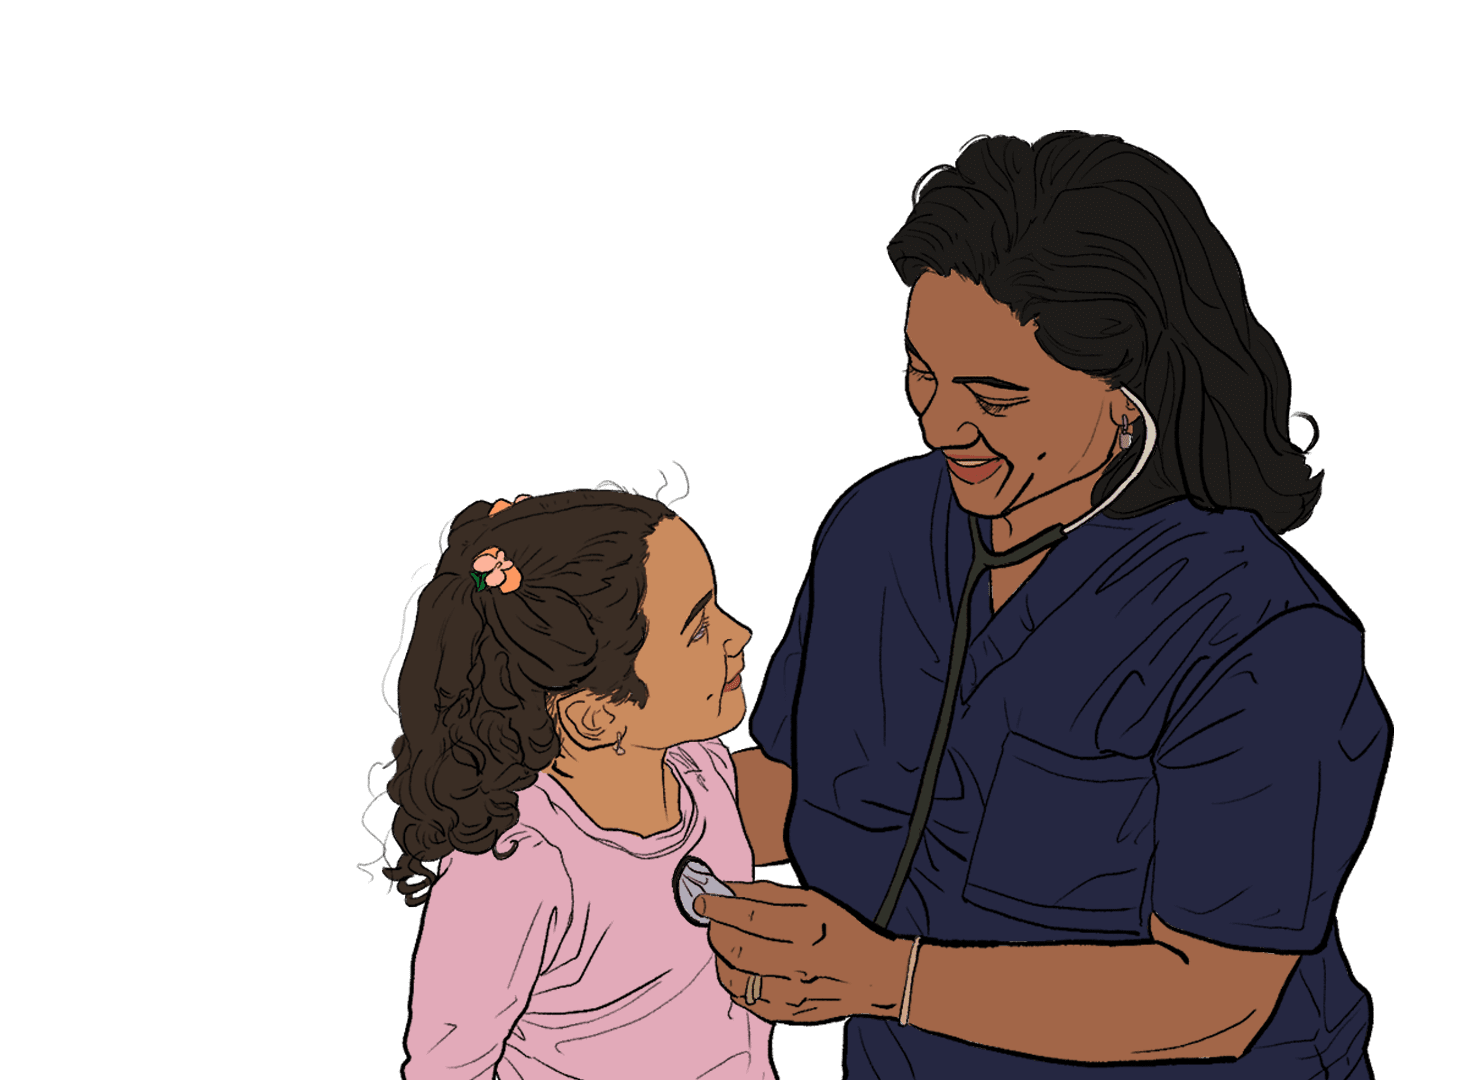 A colored-in sketch of a Medical Assistant listening to a child's heartbeat through a stethoscope.